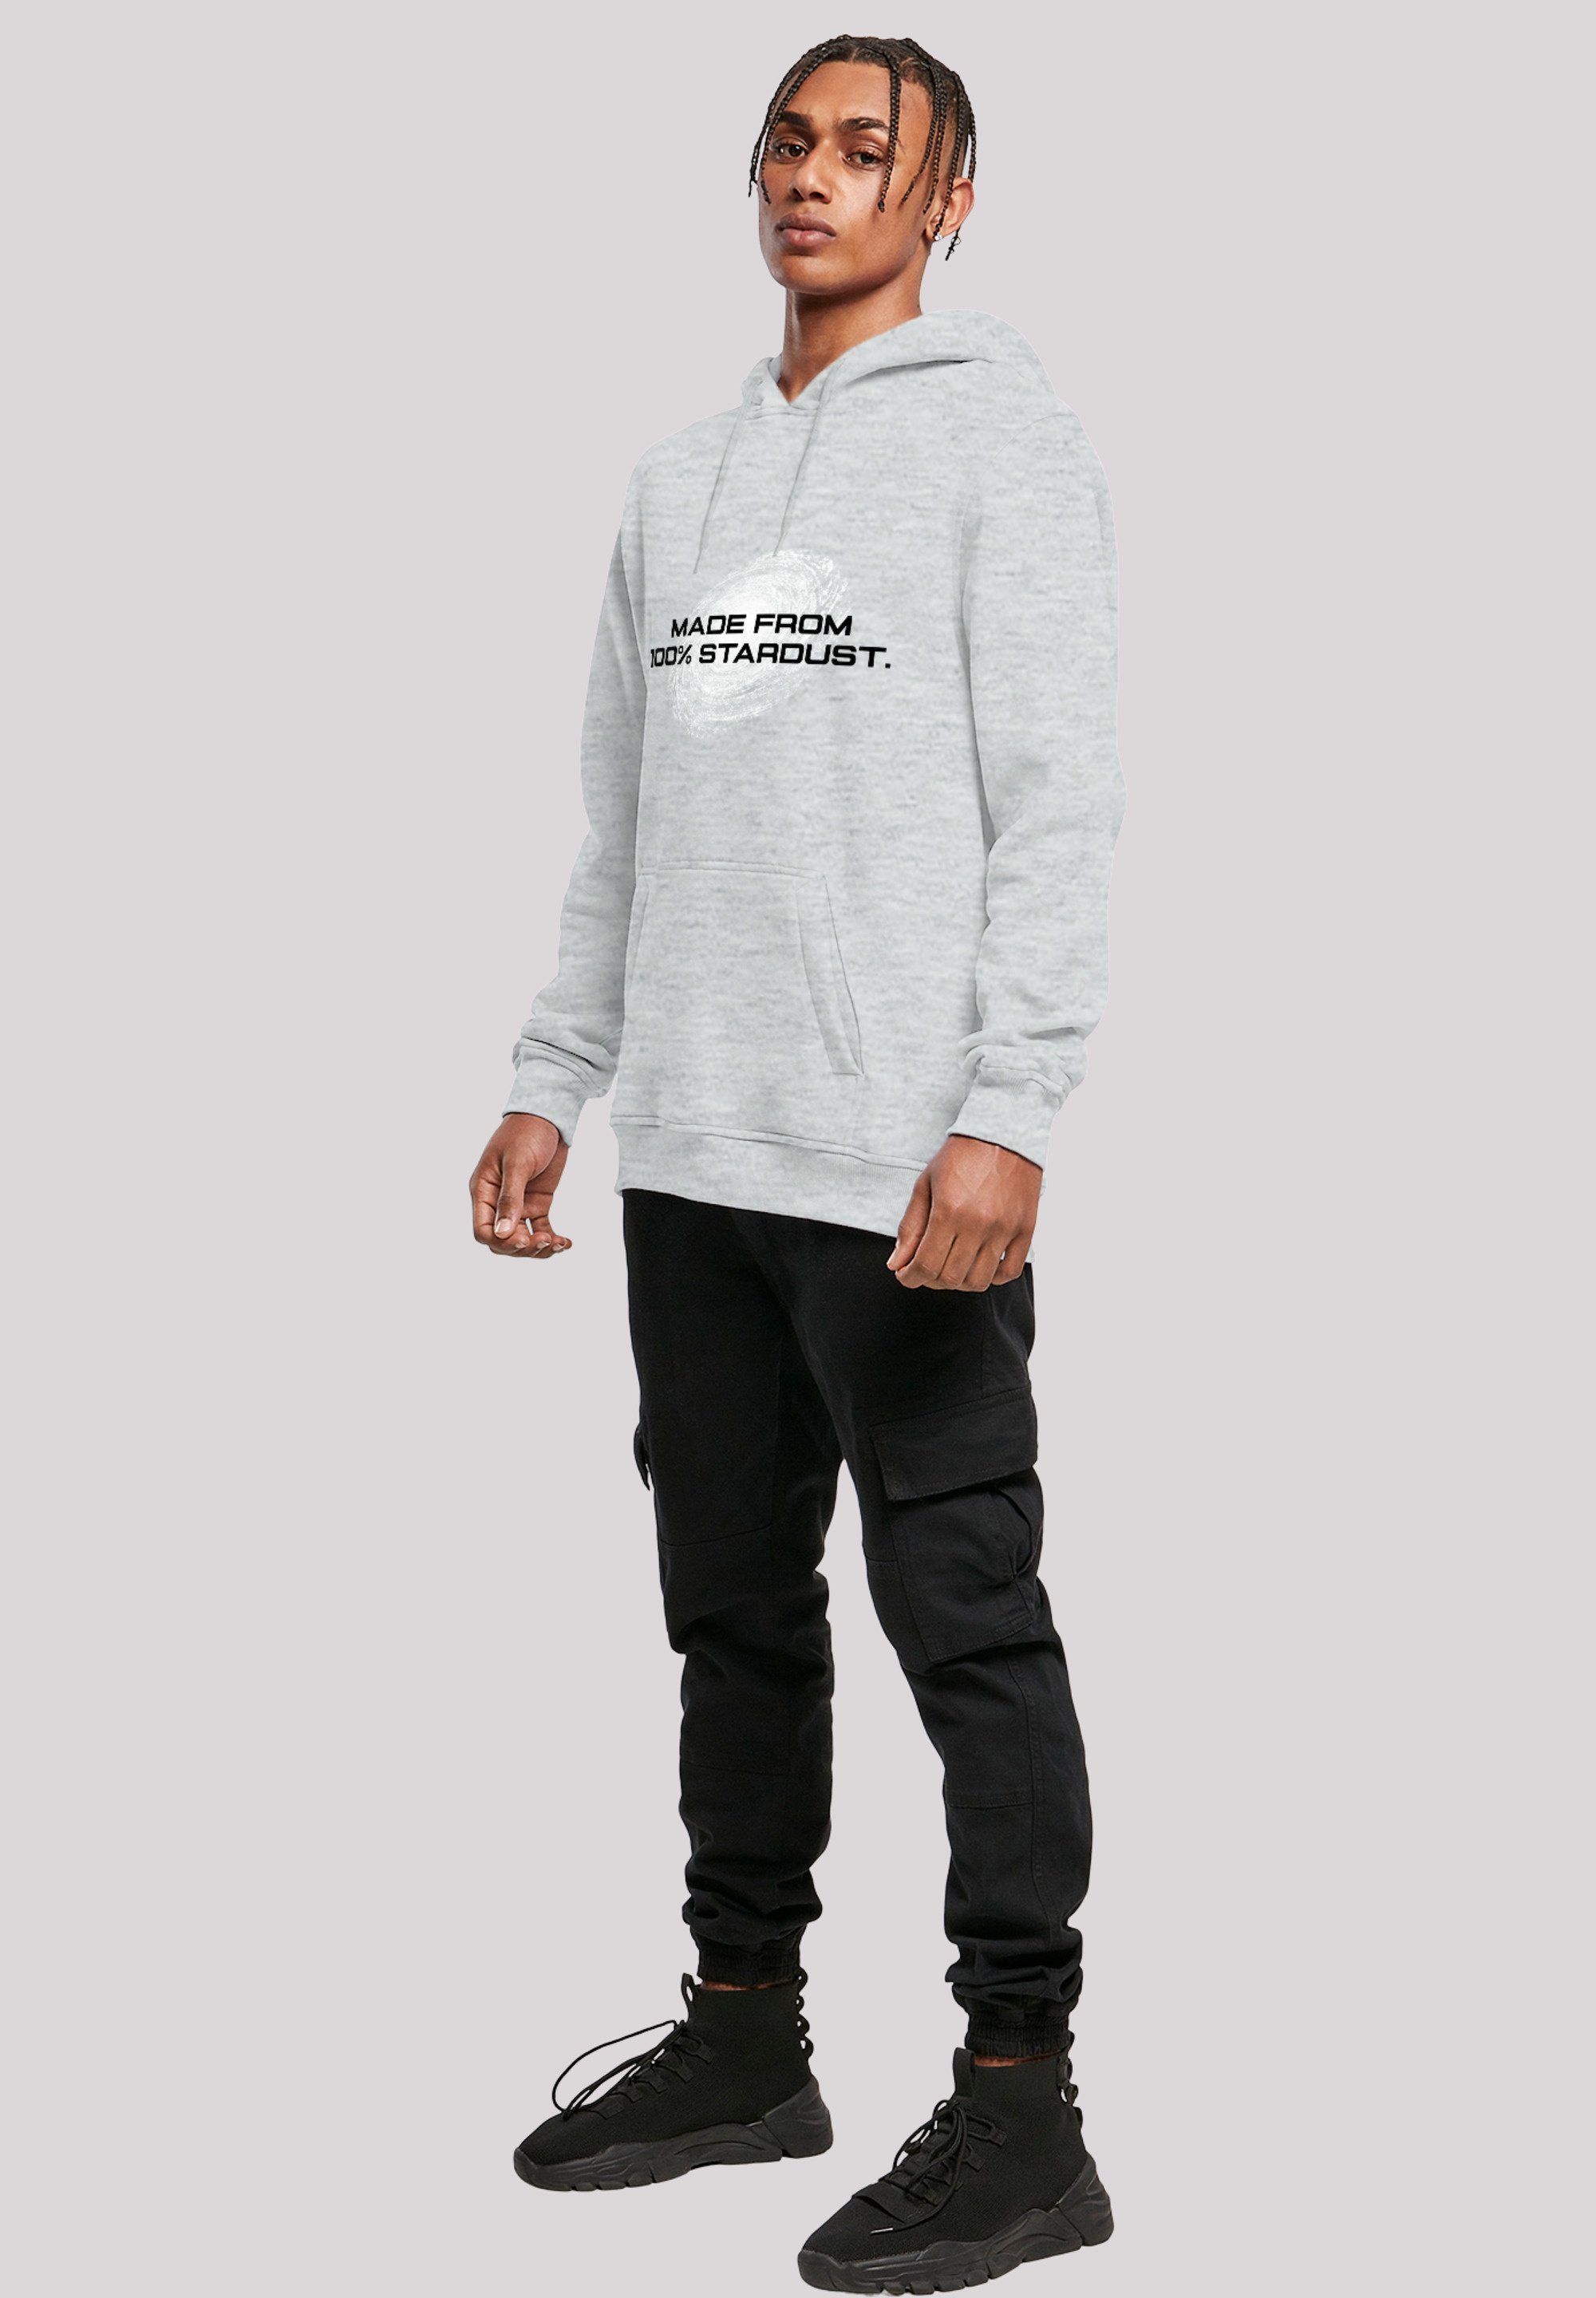 F4NT4STIC Kapuzenpullover PHIBER SpaceOne MADE FROM 100% STARDUST Print heather grey